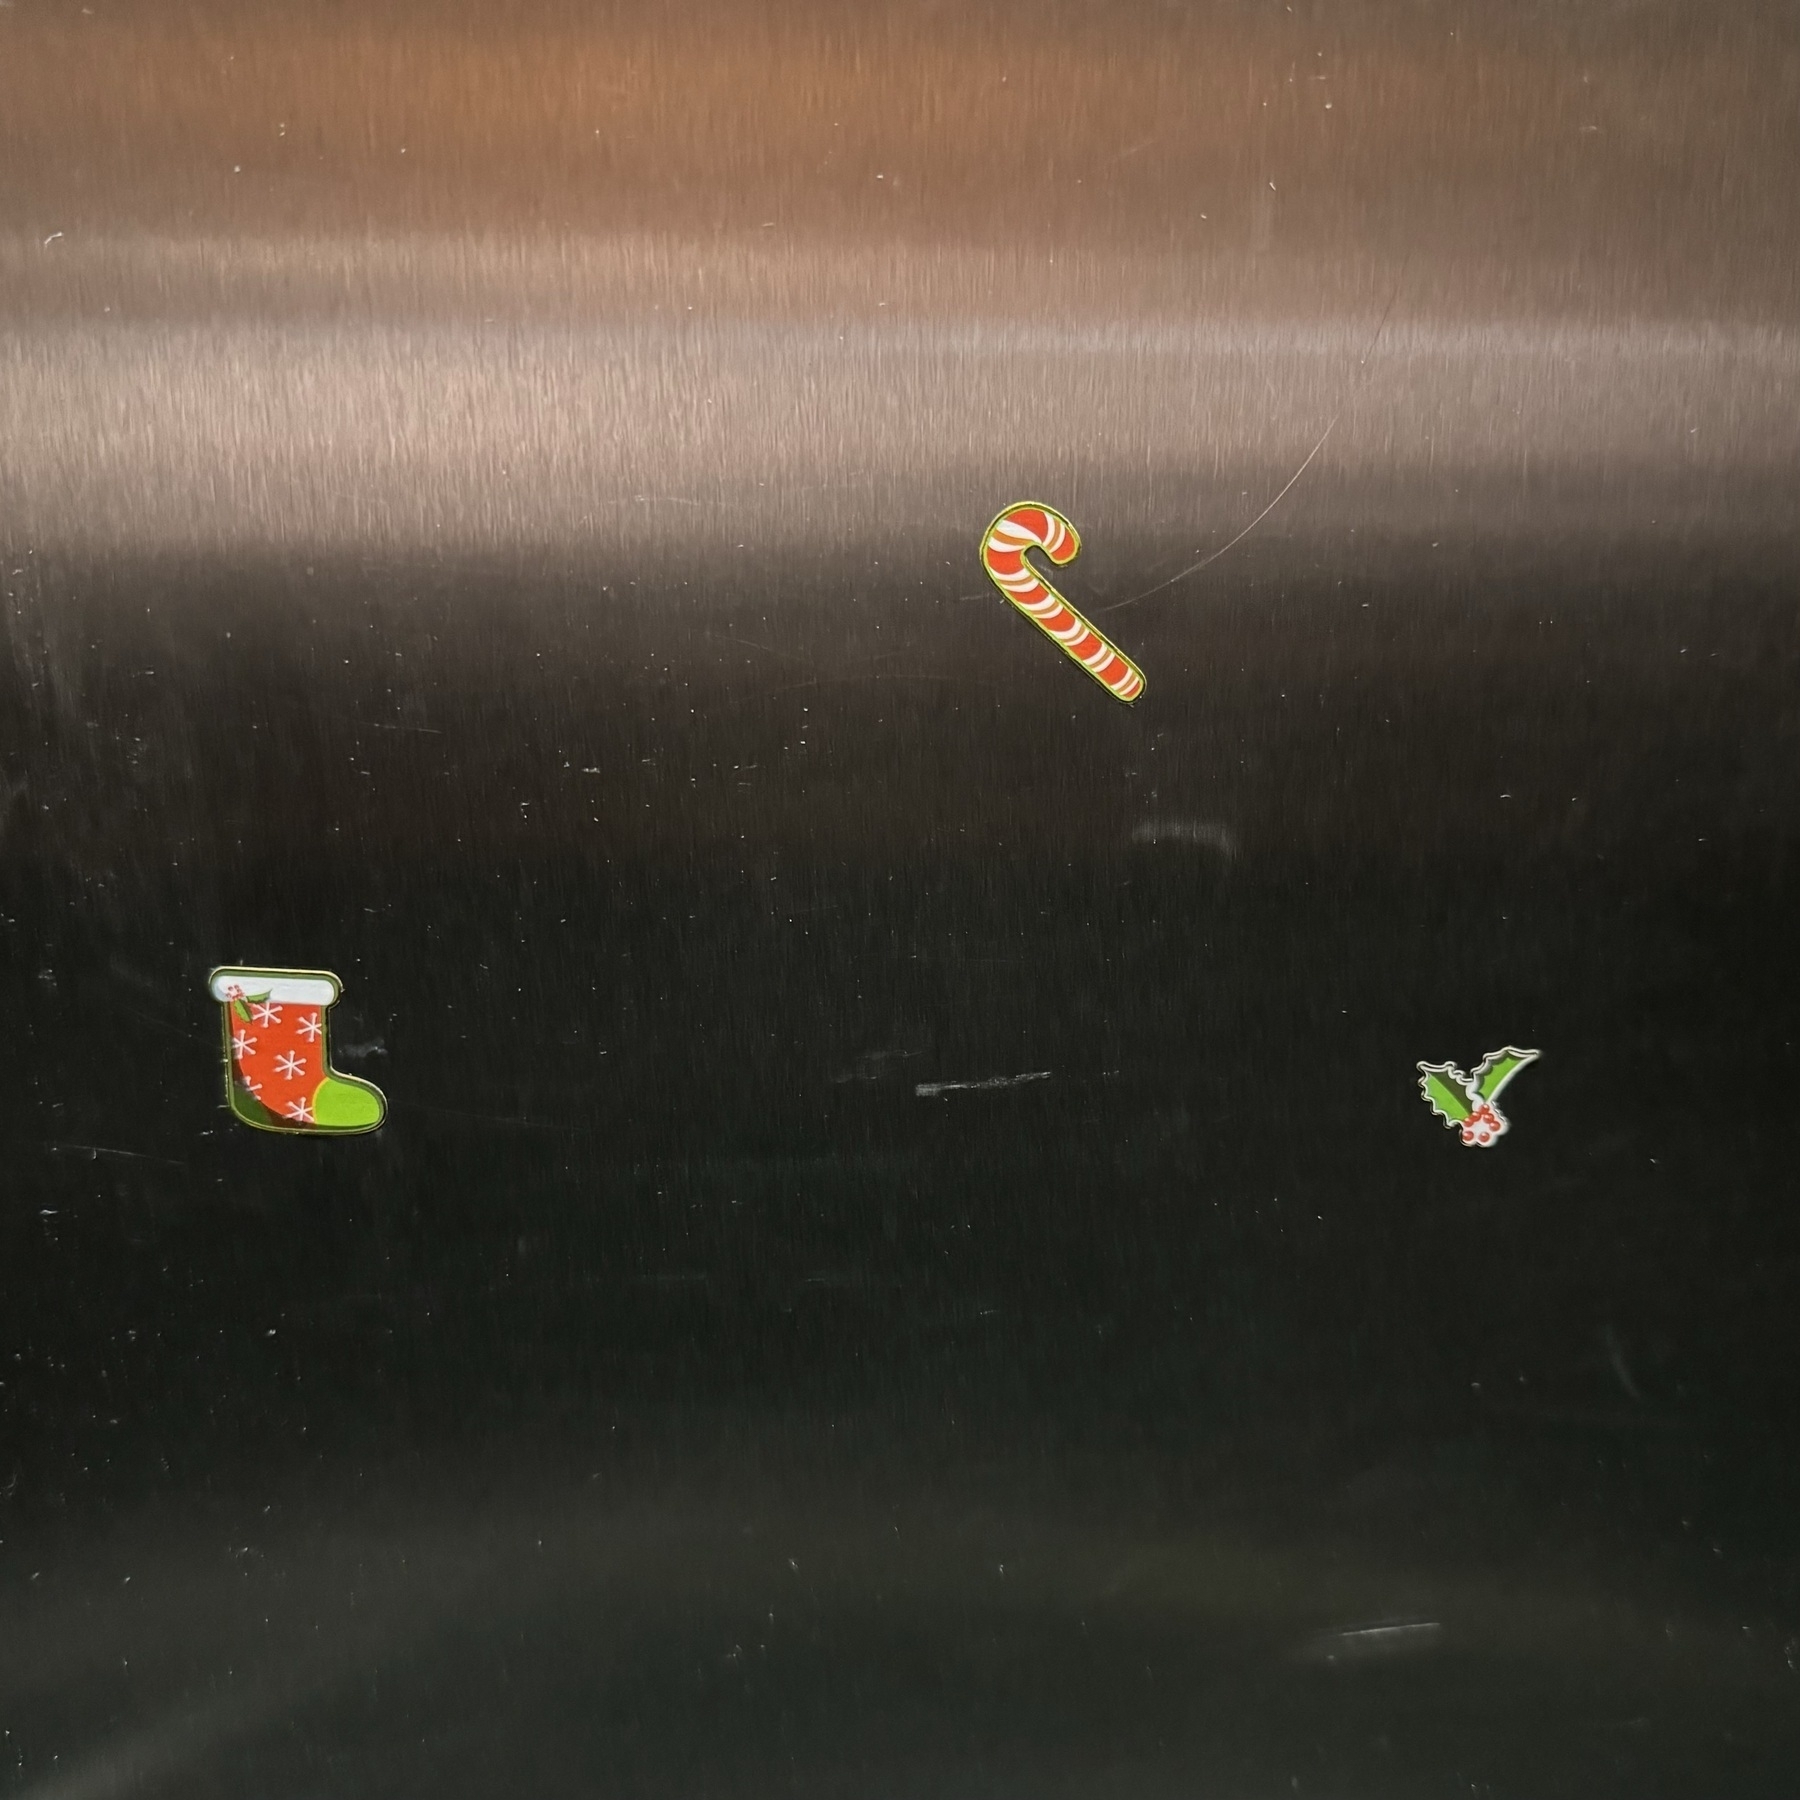 Xmas stickers of a stocking, candy cane and holly stuck on the wall of a lift.